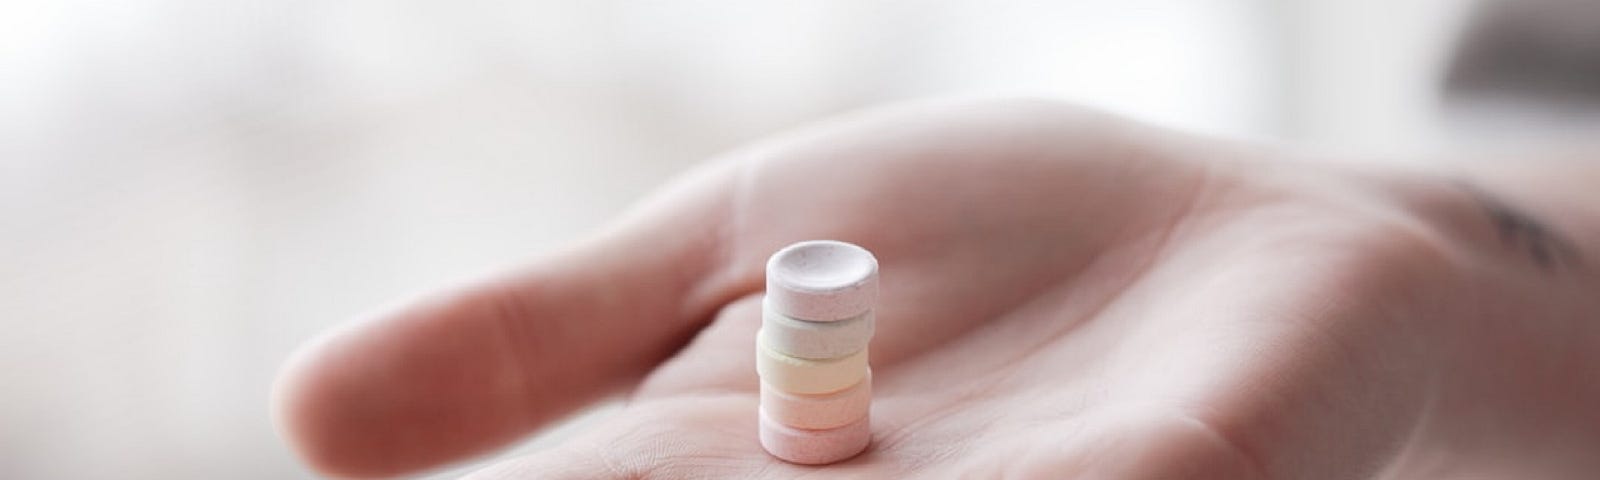 A hand holding a stack of pills.